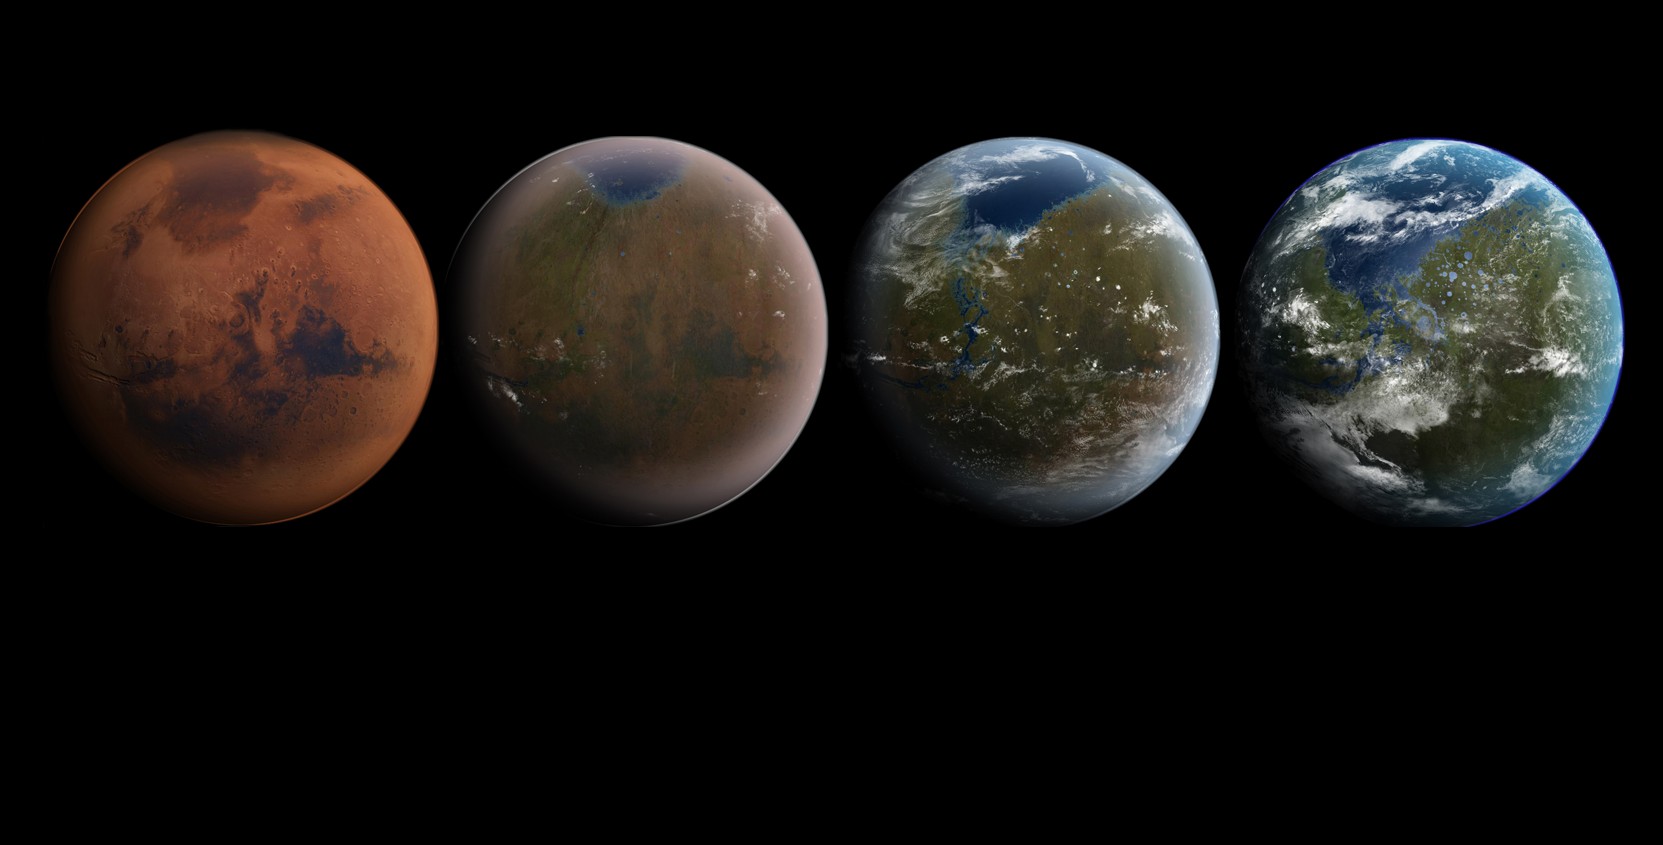 Mars as an Earth-like planet in the past not likely, according to new study